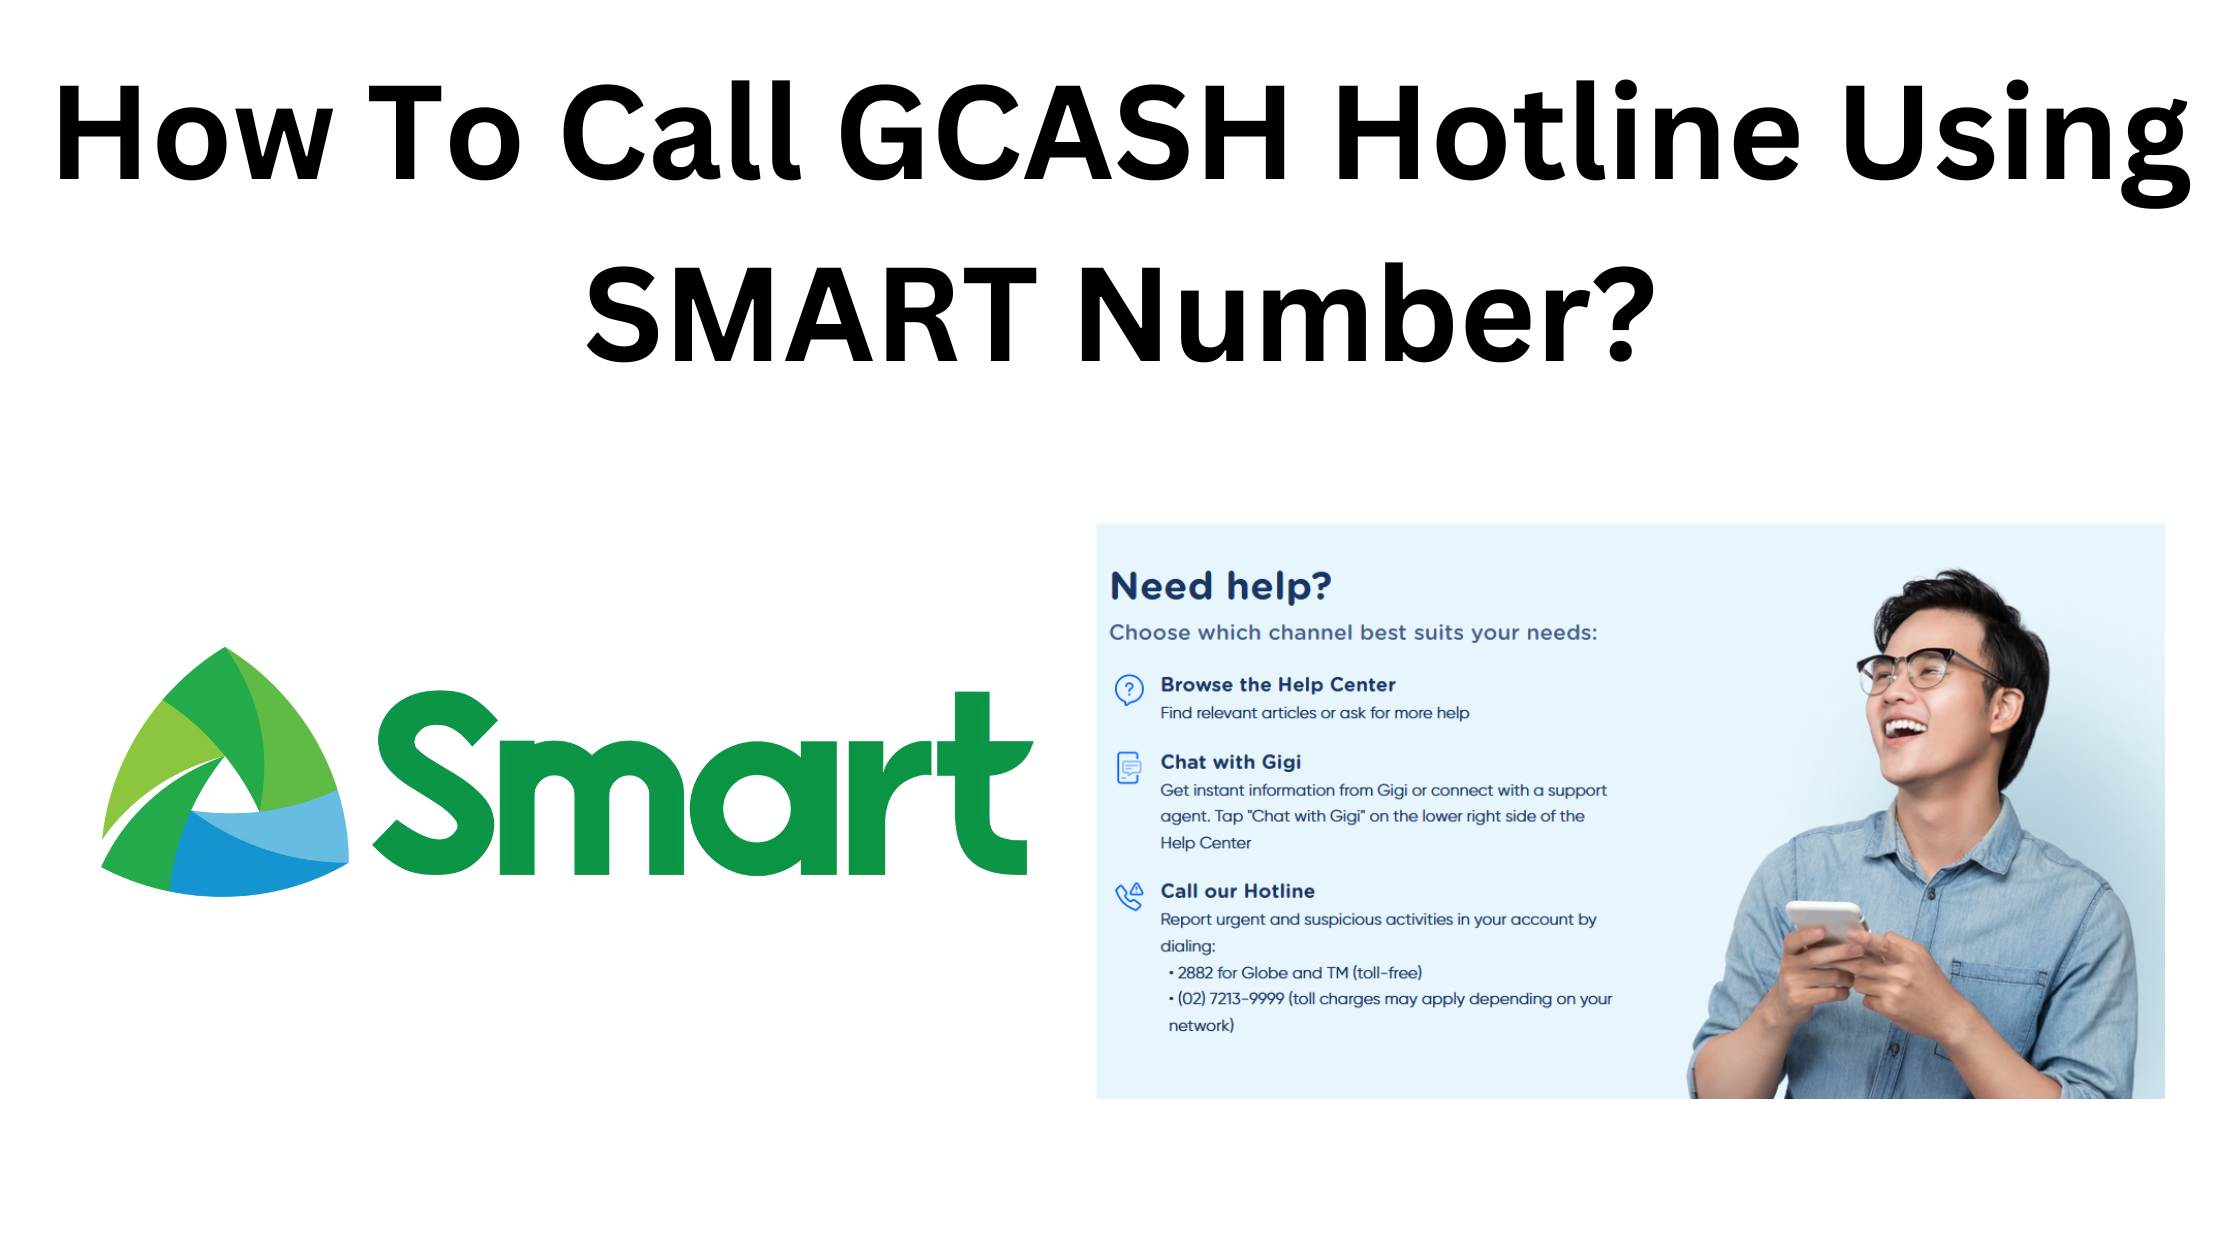 How To Call GCASH Hotline Using SMART Number